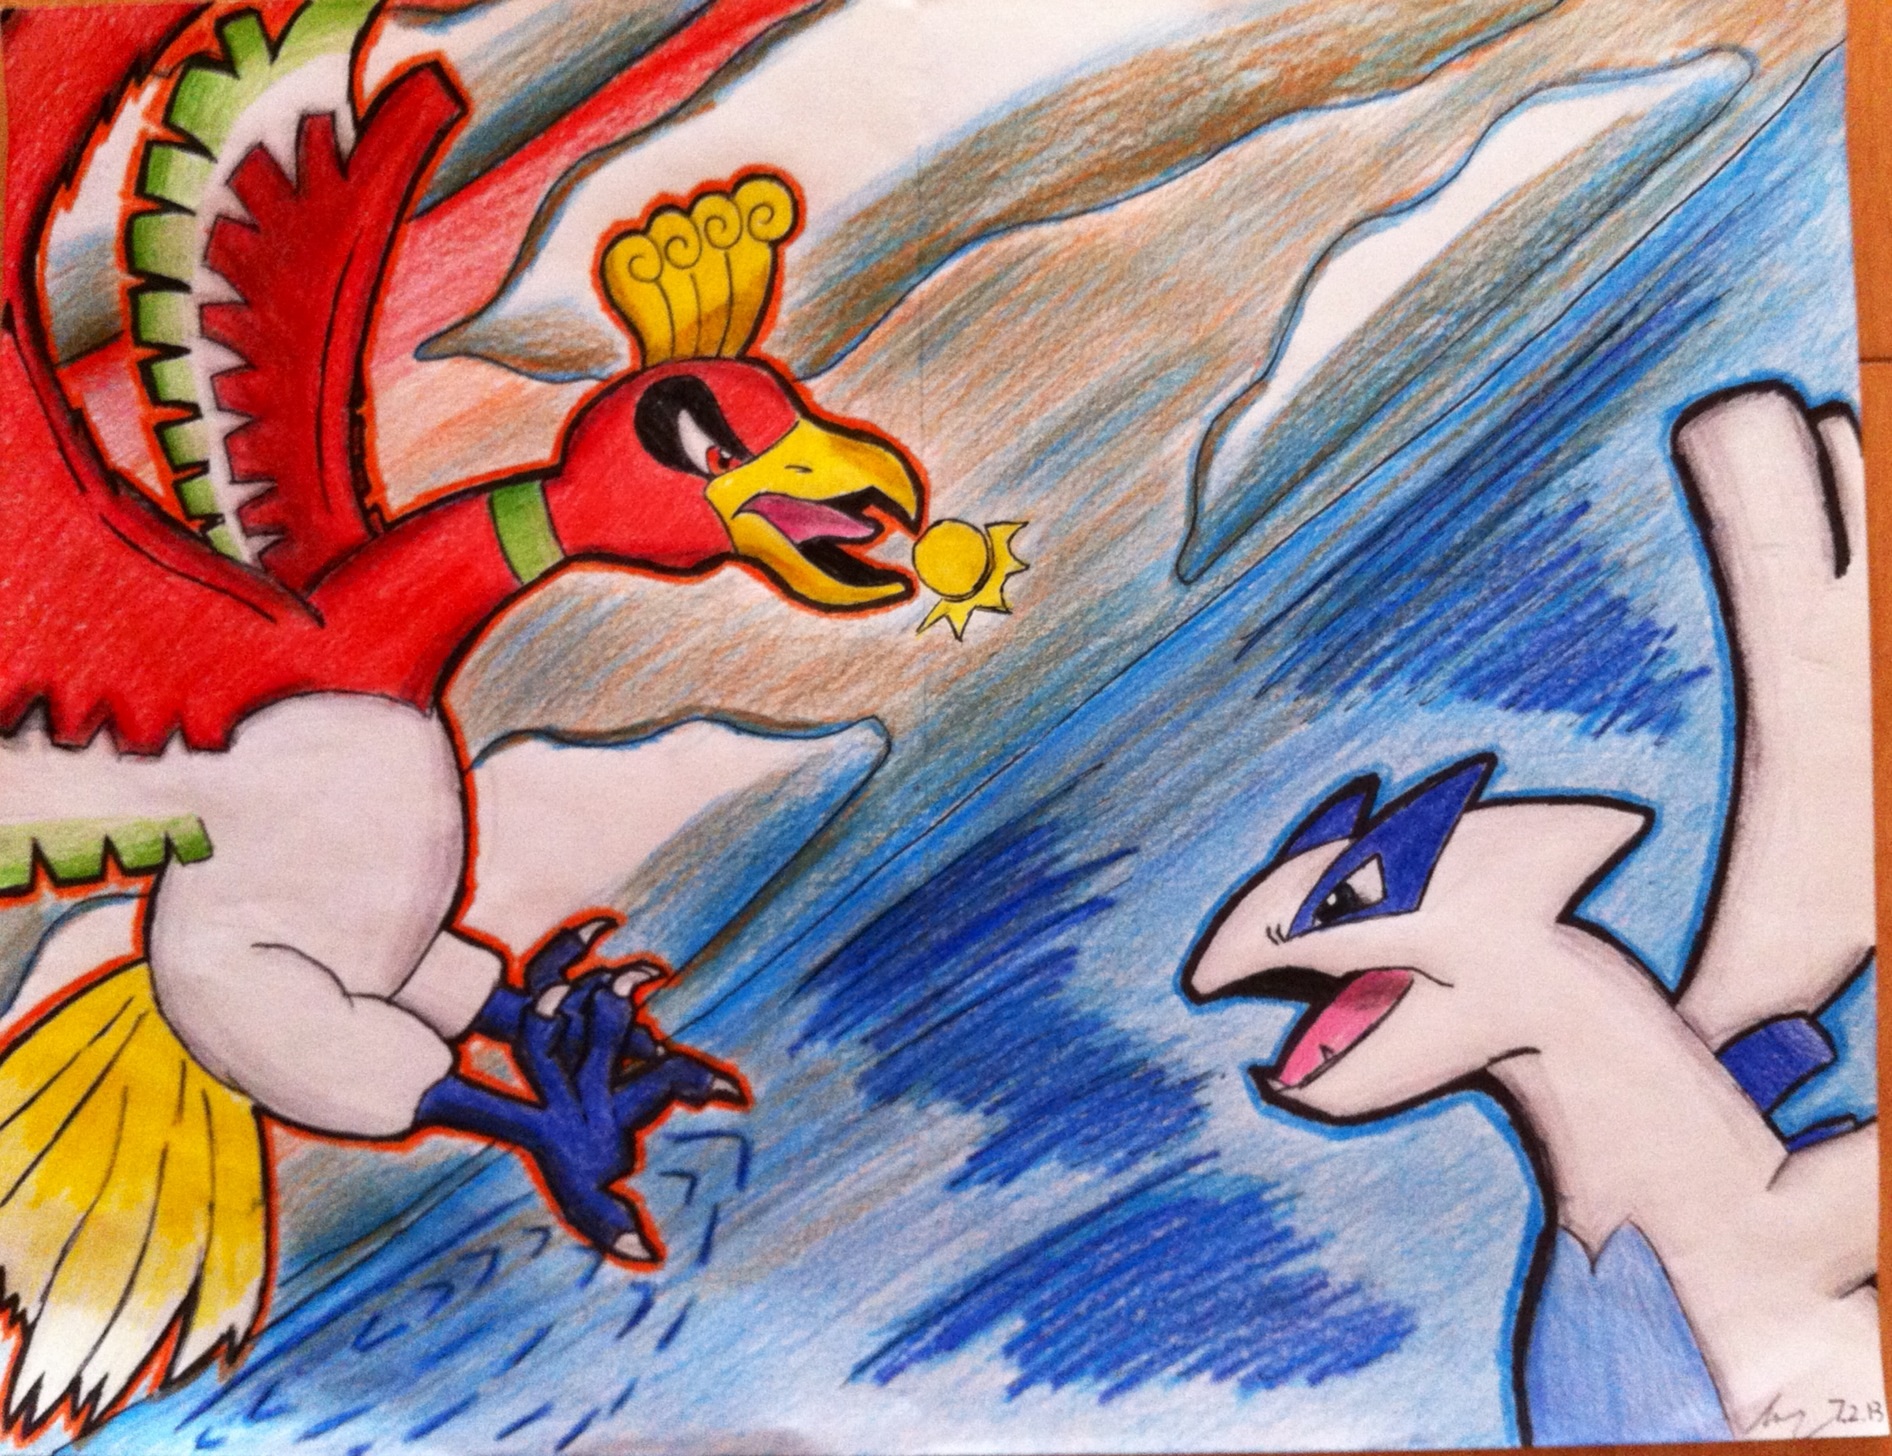 Lugia and Ho-oh by LlKkO on DeviantArt